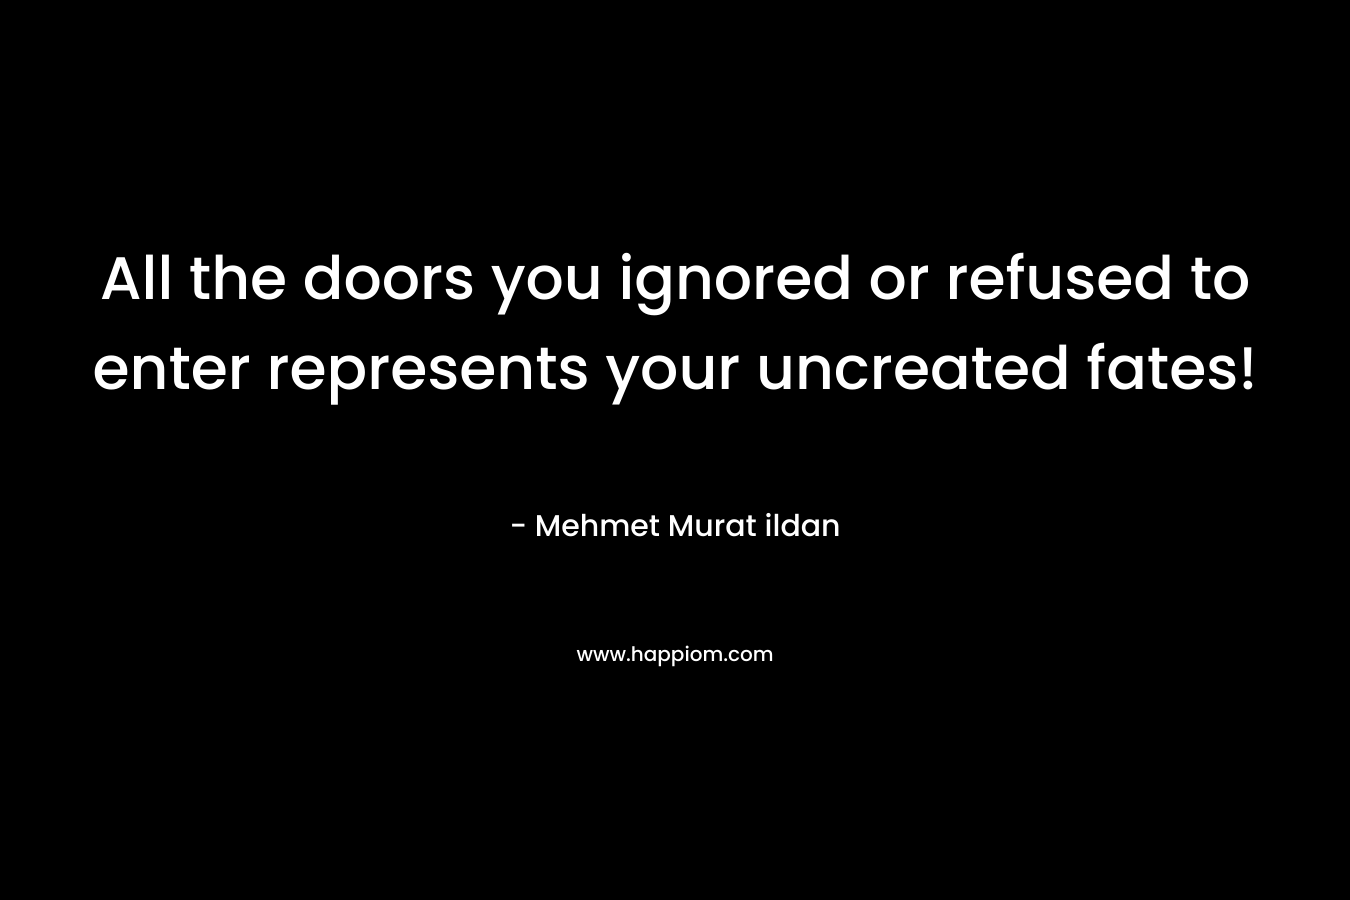 All the doors you ignored or refused to enter represents your uncreated fates!